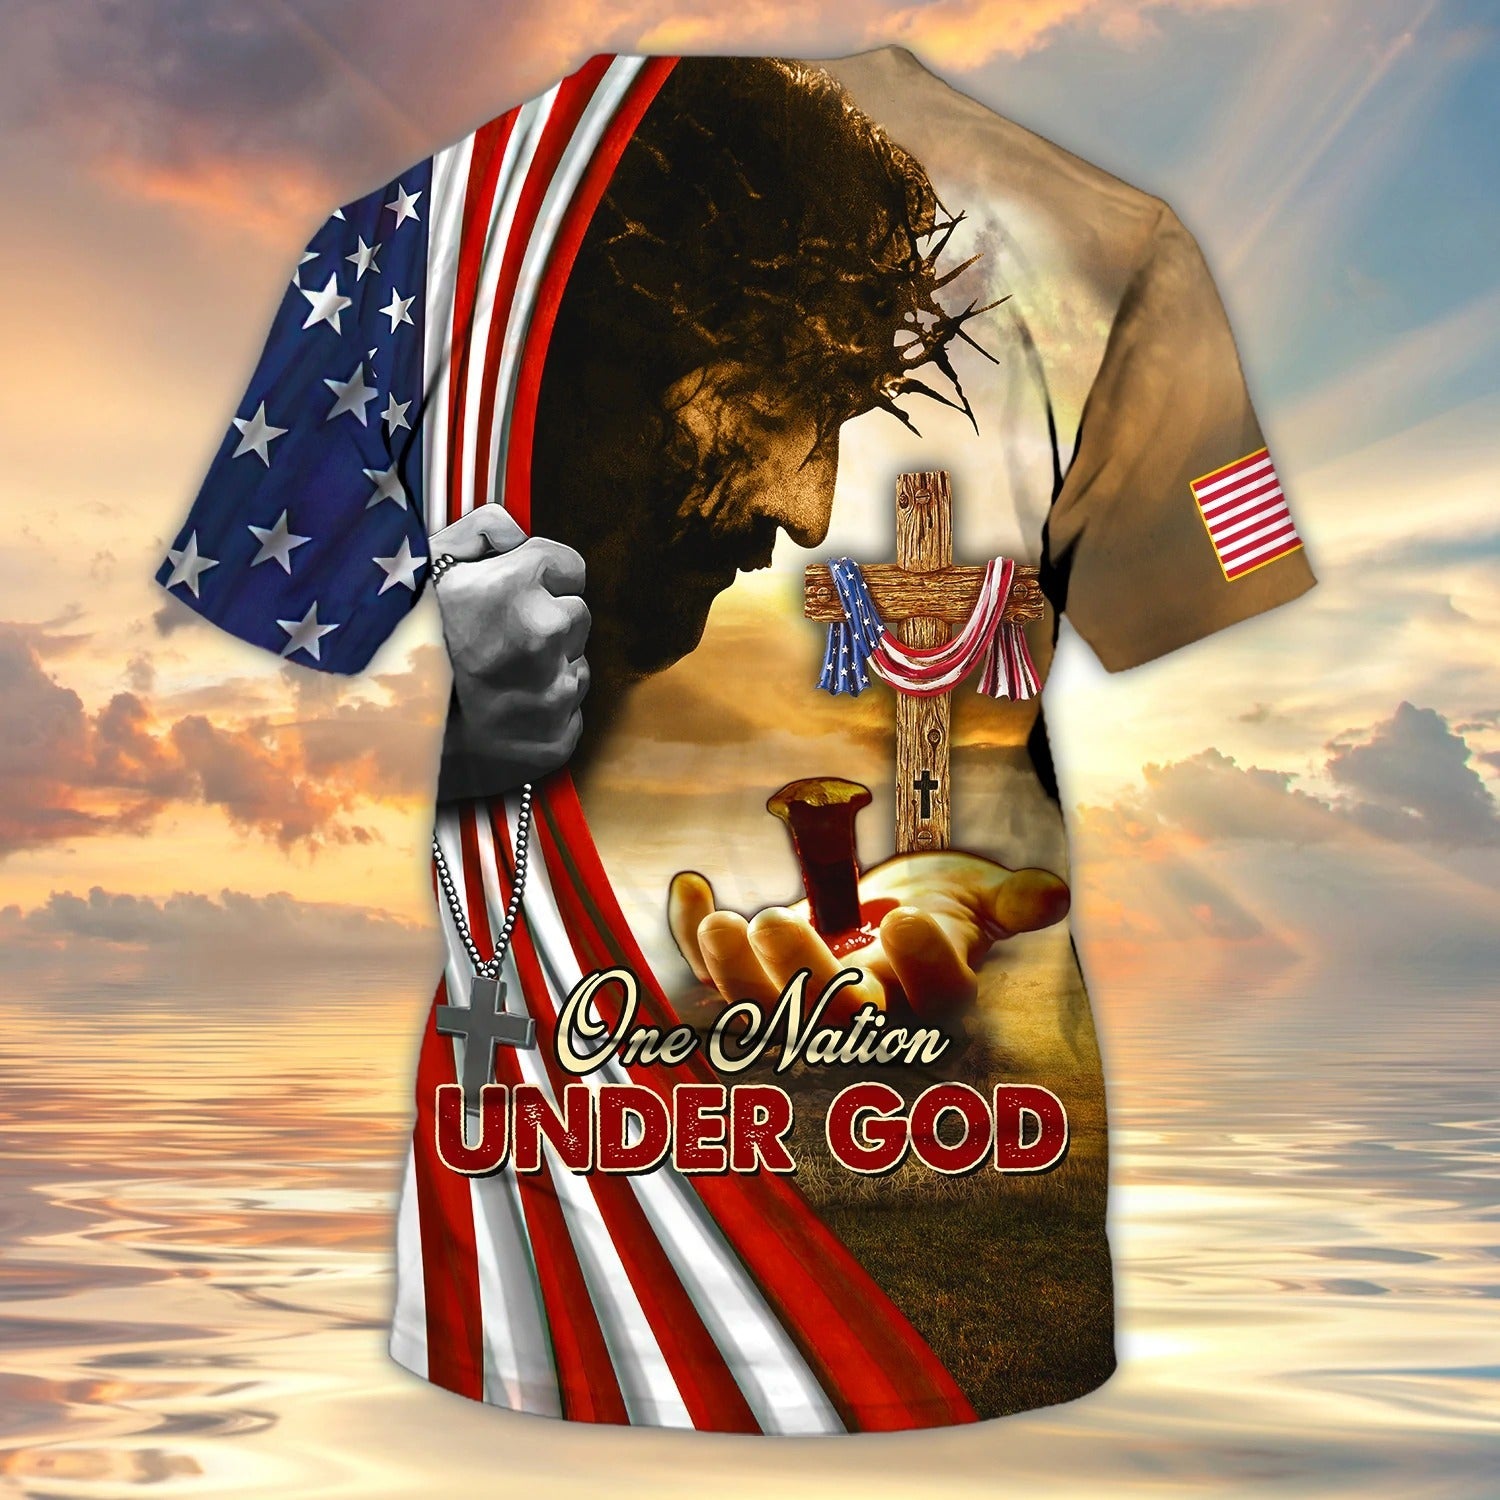 One Nation Under God Christian 3D Full Printed Shirts/ Independence Day Hoodie 3D Tee Shirt/ Patriotice 3D Tshirts